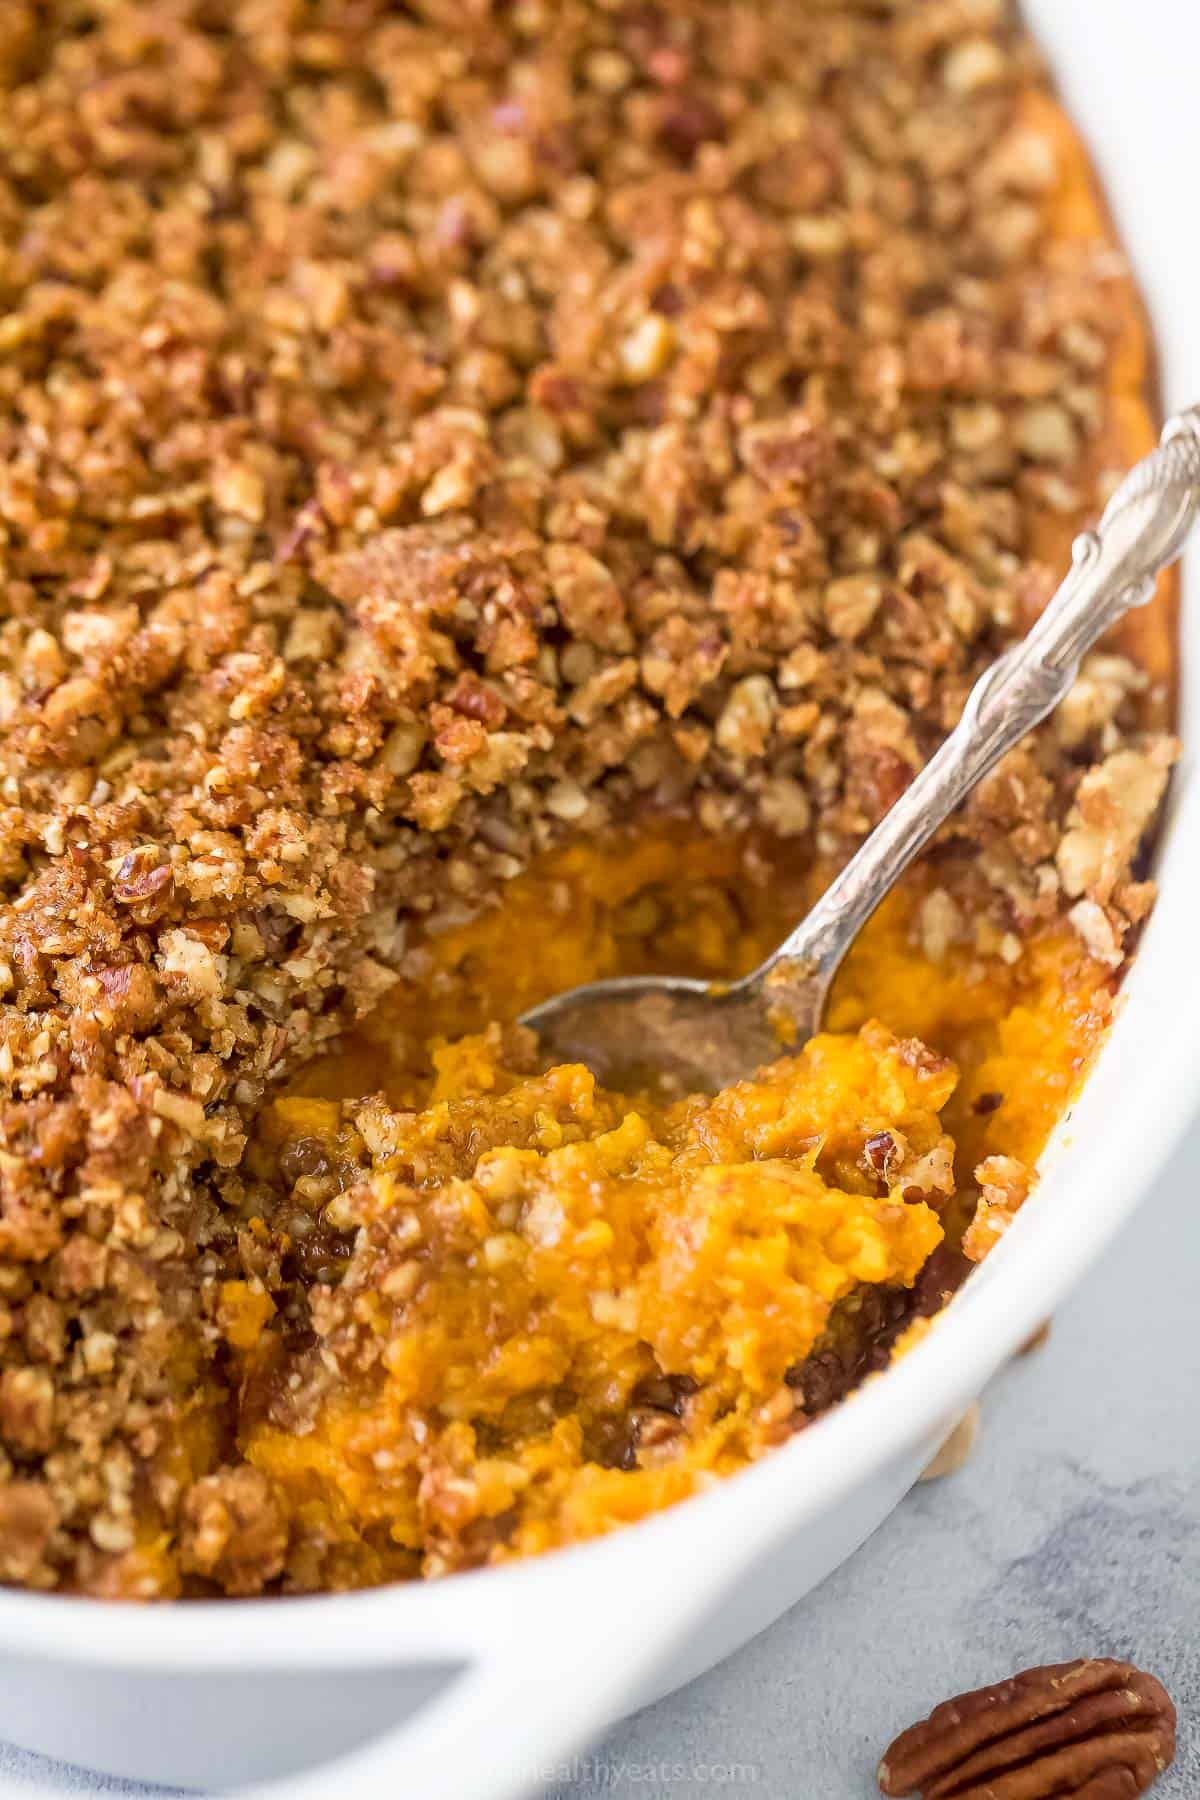 A close-up shot of a serving spoon scooping out a helping of sweet potato casserole from a baking dish